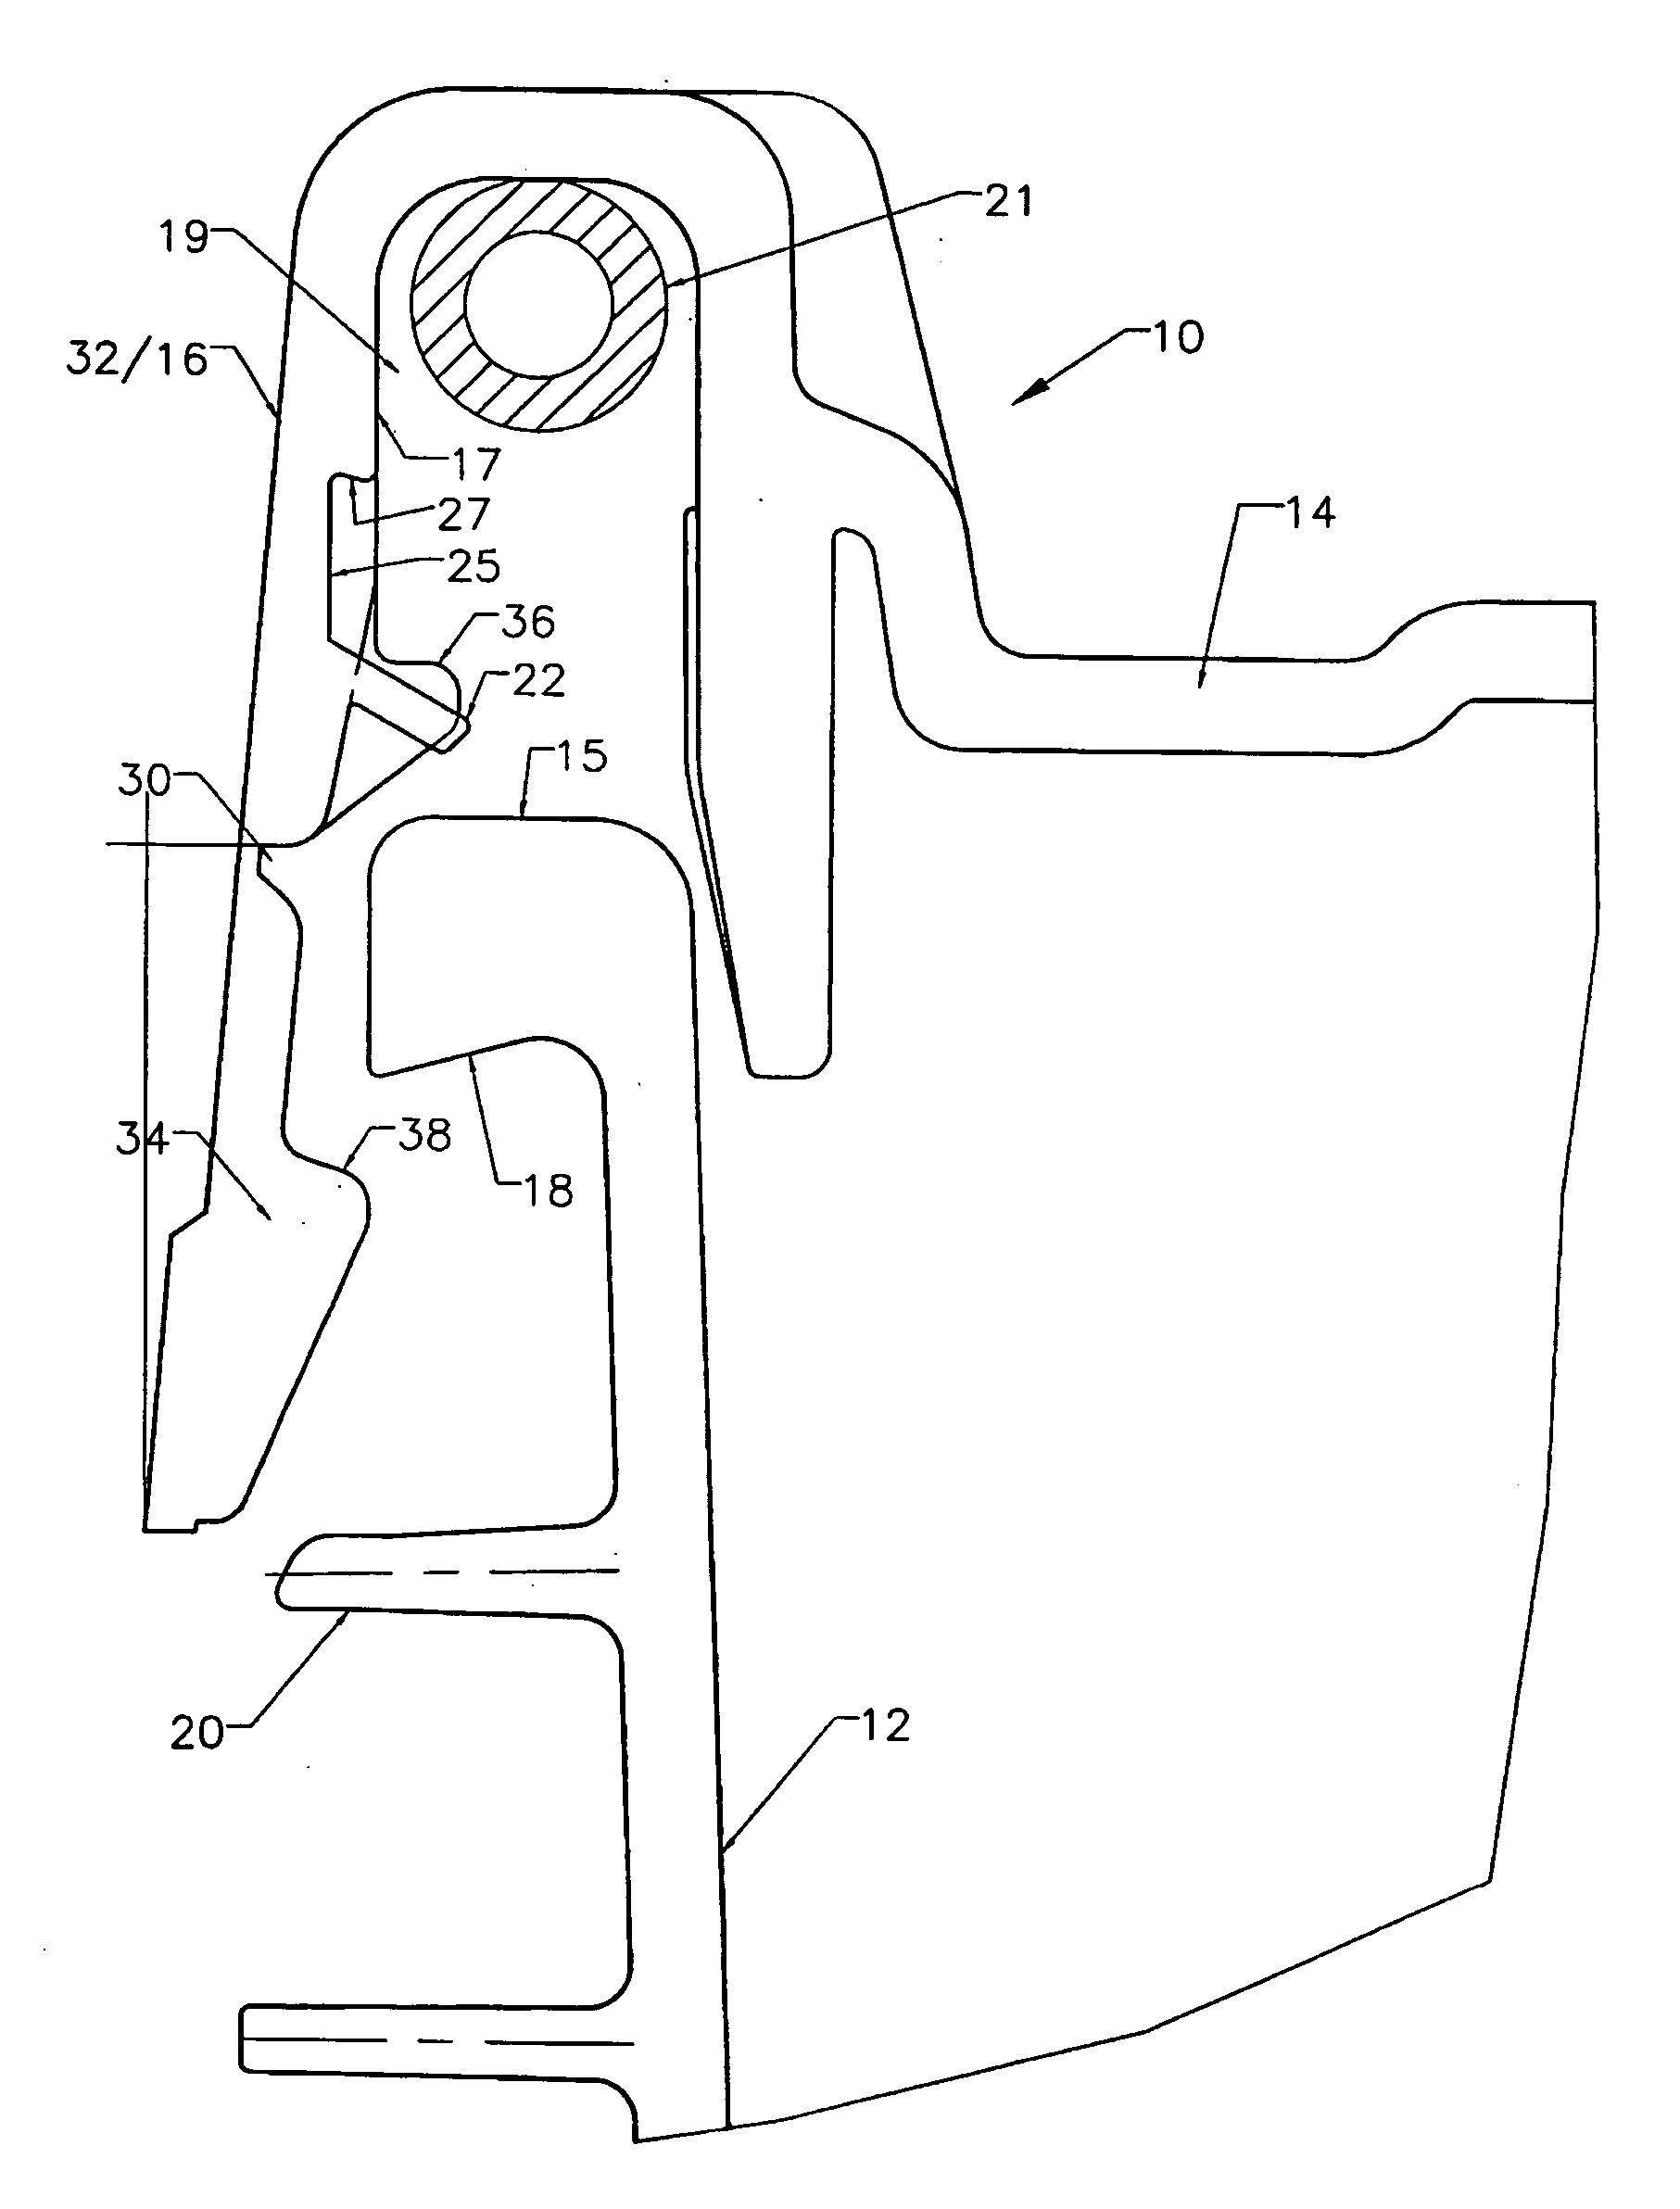 Apparatus for securing gasket prior to lid installation